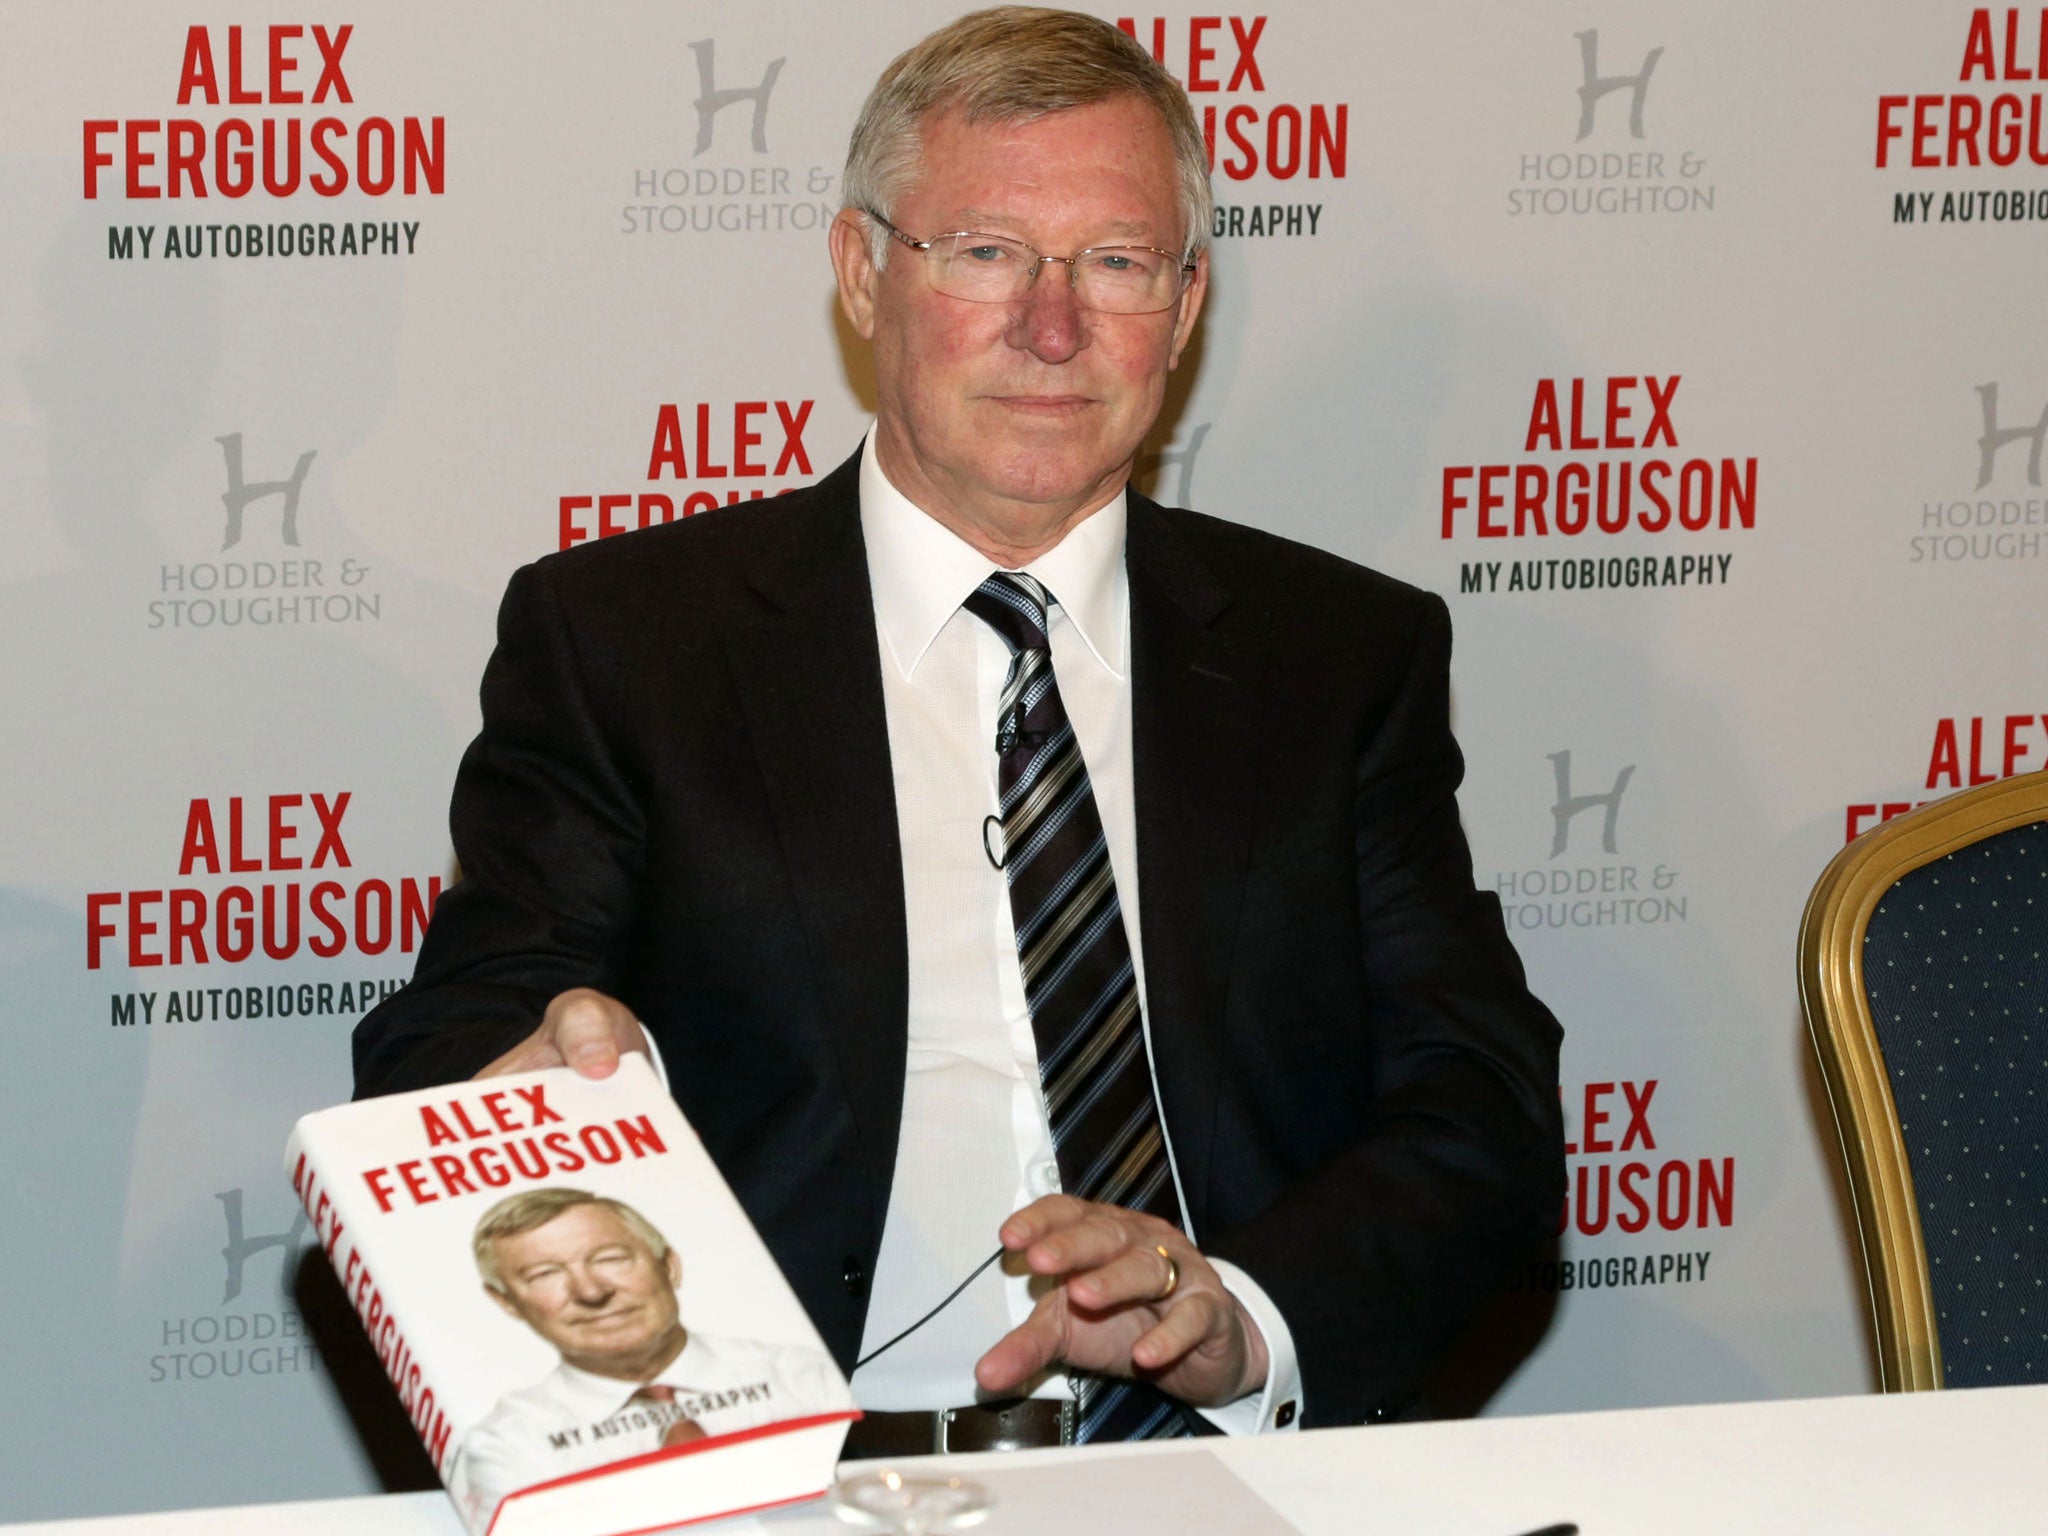 Sir Alex Ferguson at the launch of his autobiography